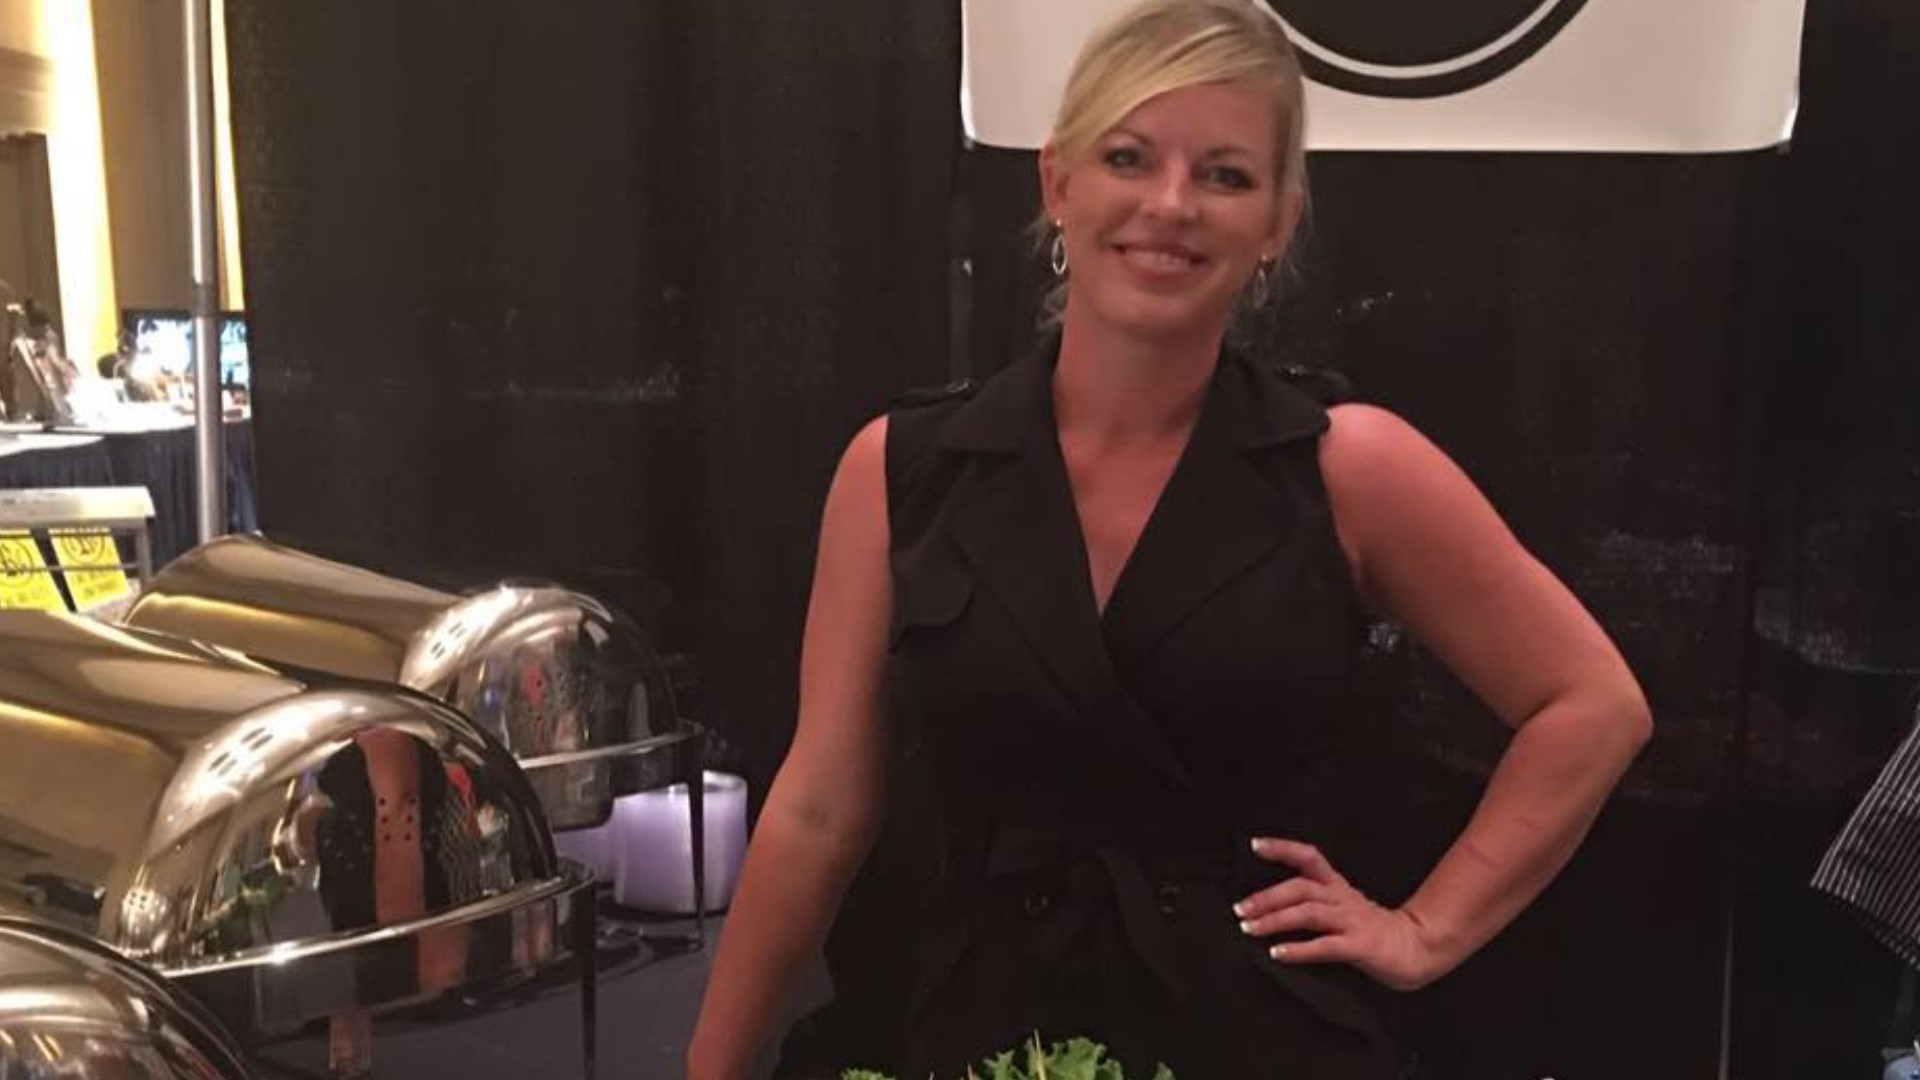 Next Level Chef contestant April Clayton of Muscle Shoals shares how she got to where she is.